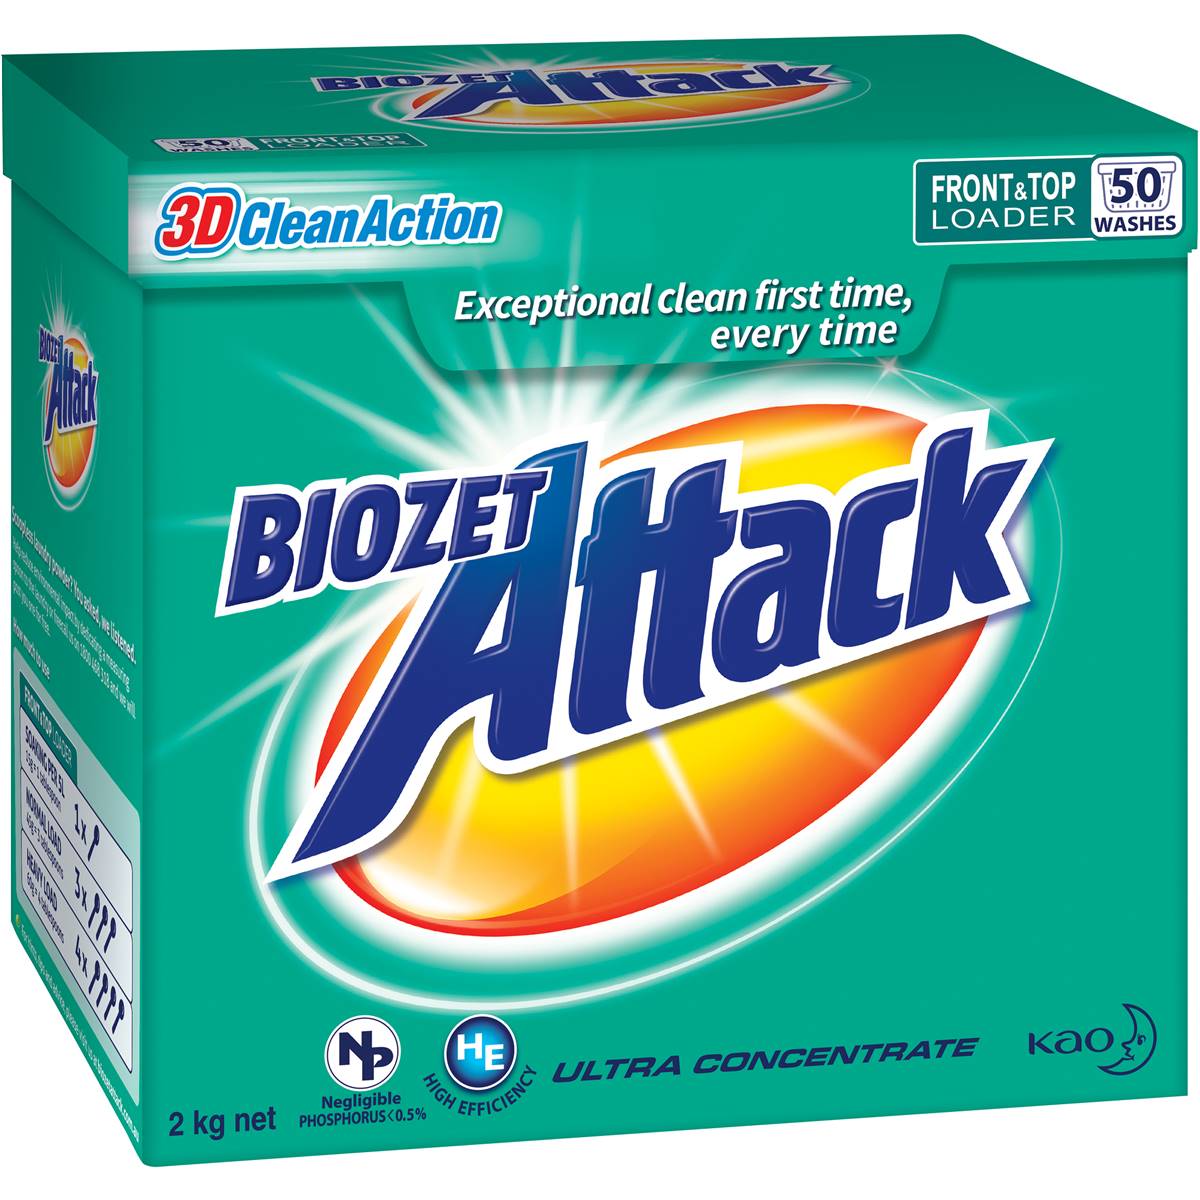 Biozet Attack Front & Top Loader 3D Clean Action Laundry Powder 2kg